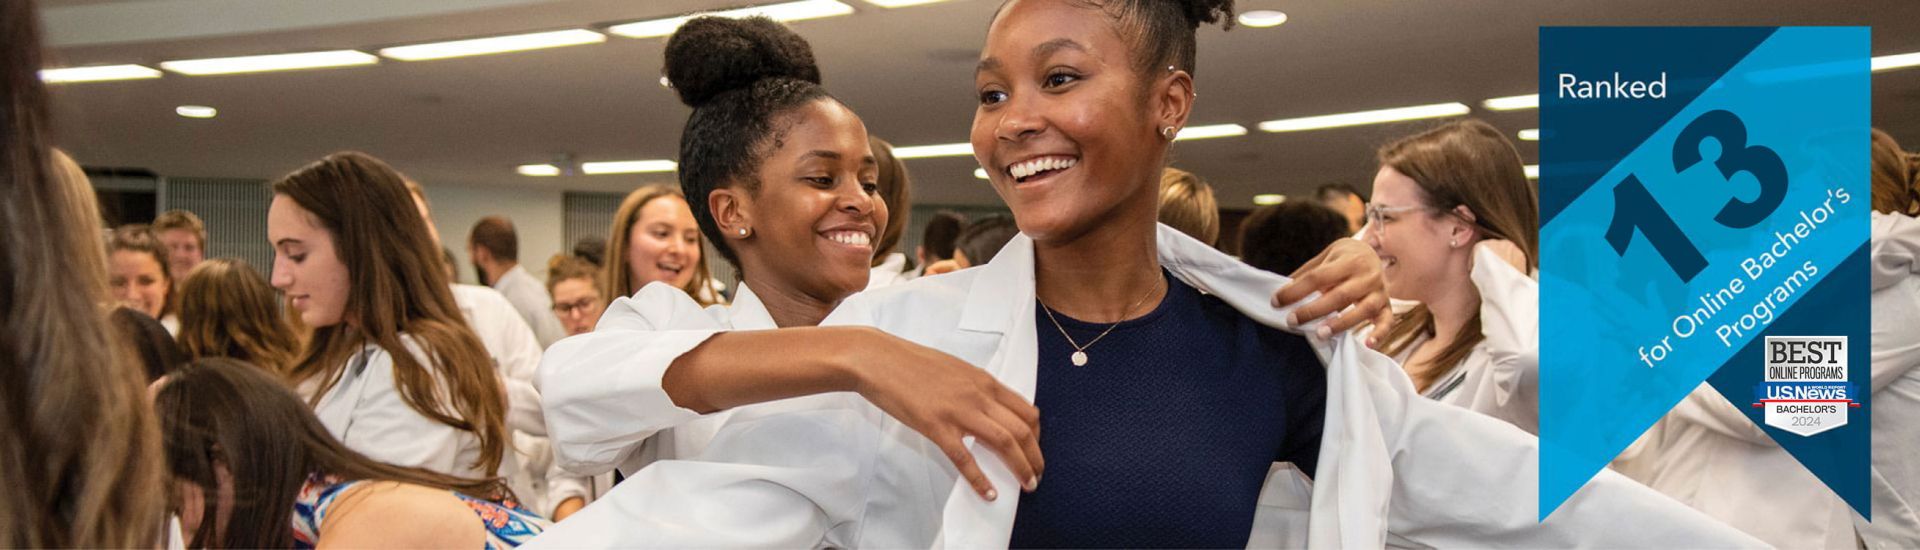 A student putting a white coat on another student | banner that reads Ranked 15 for online bachelor's programs, with the USNWR badge